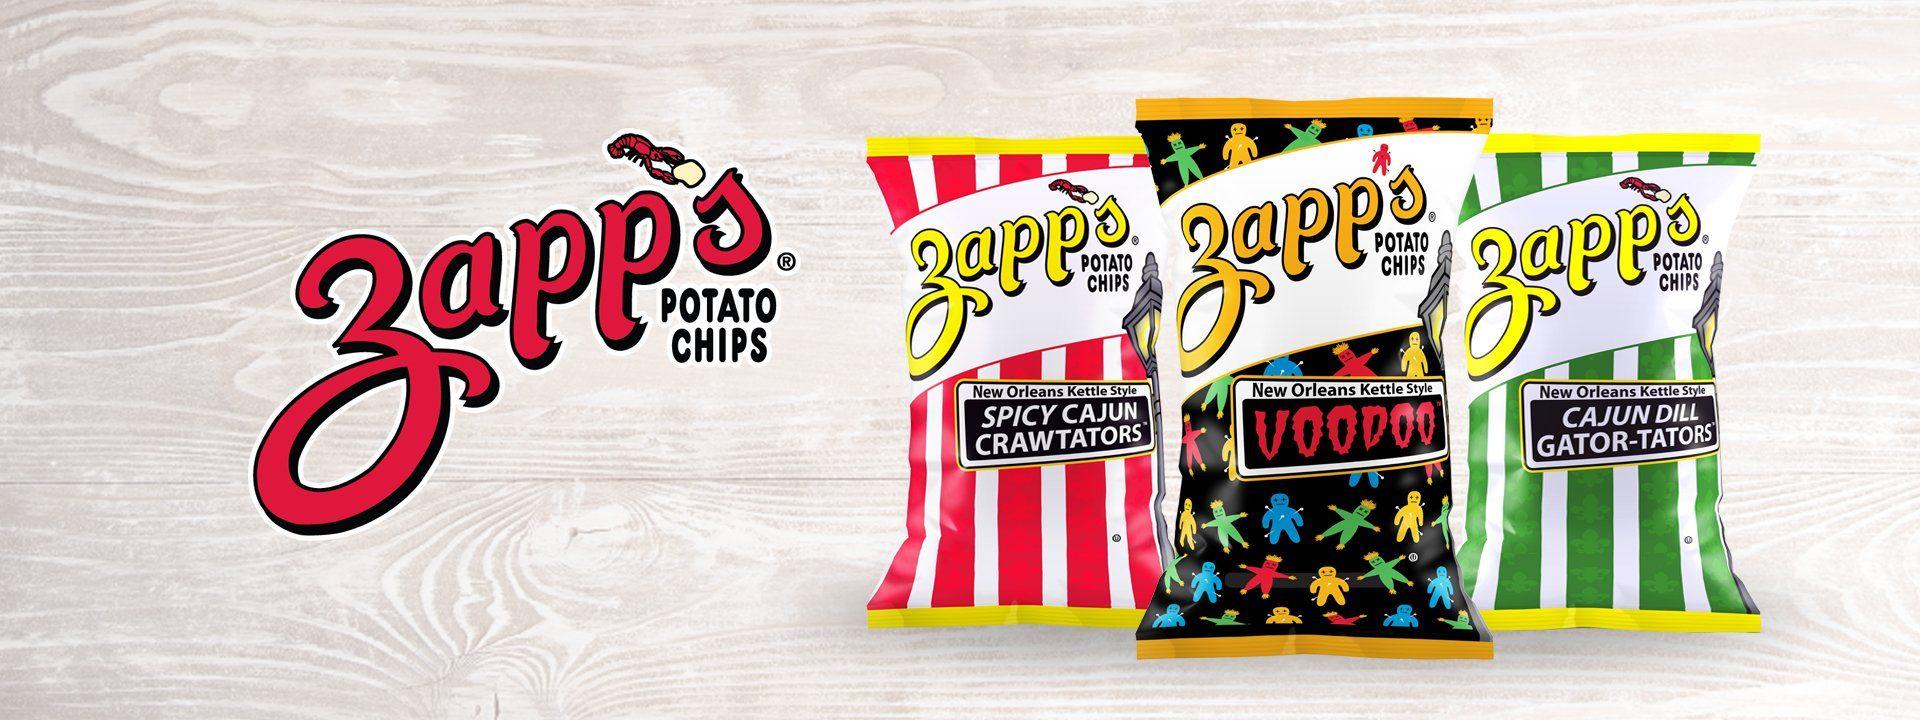 Zapp's Logo - About Zapp's Potato Chips | Utz Quality Foods - Our Snack Brands